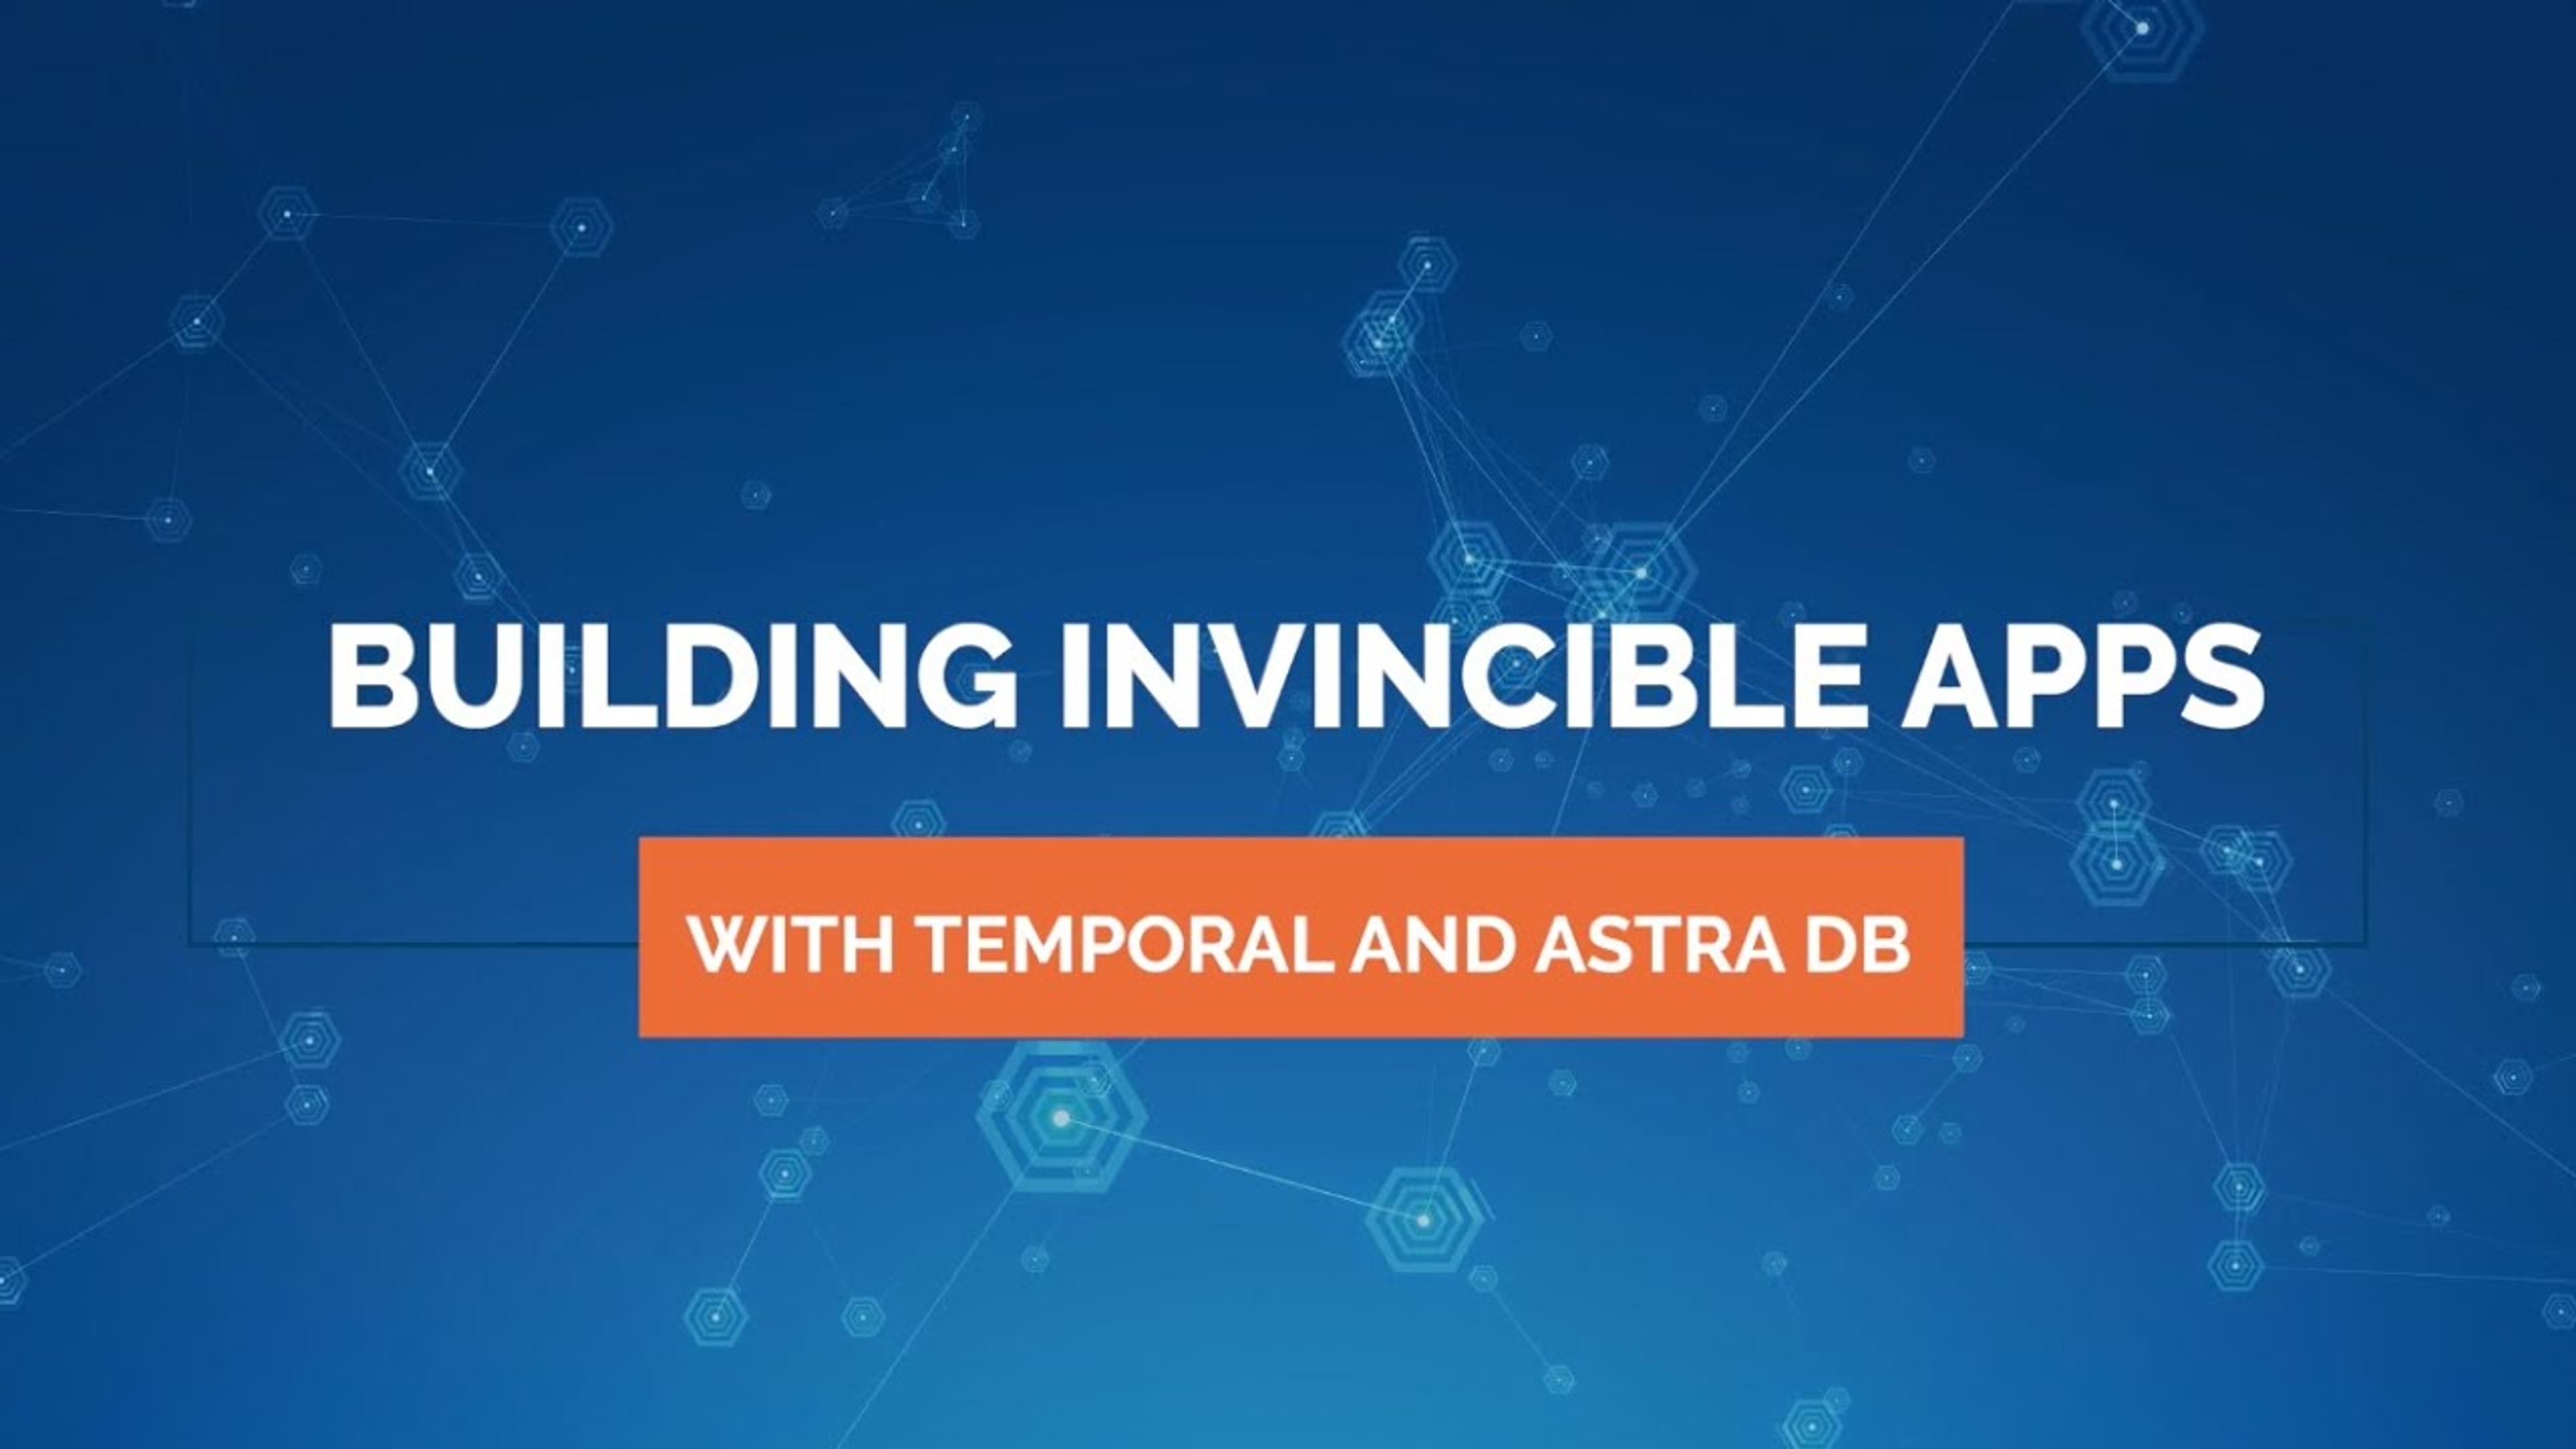 Building invincible apps with Temporal and Astra DB